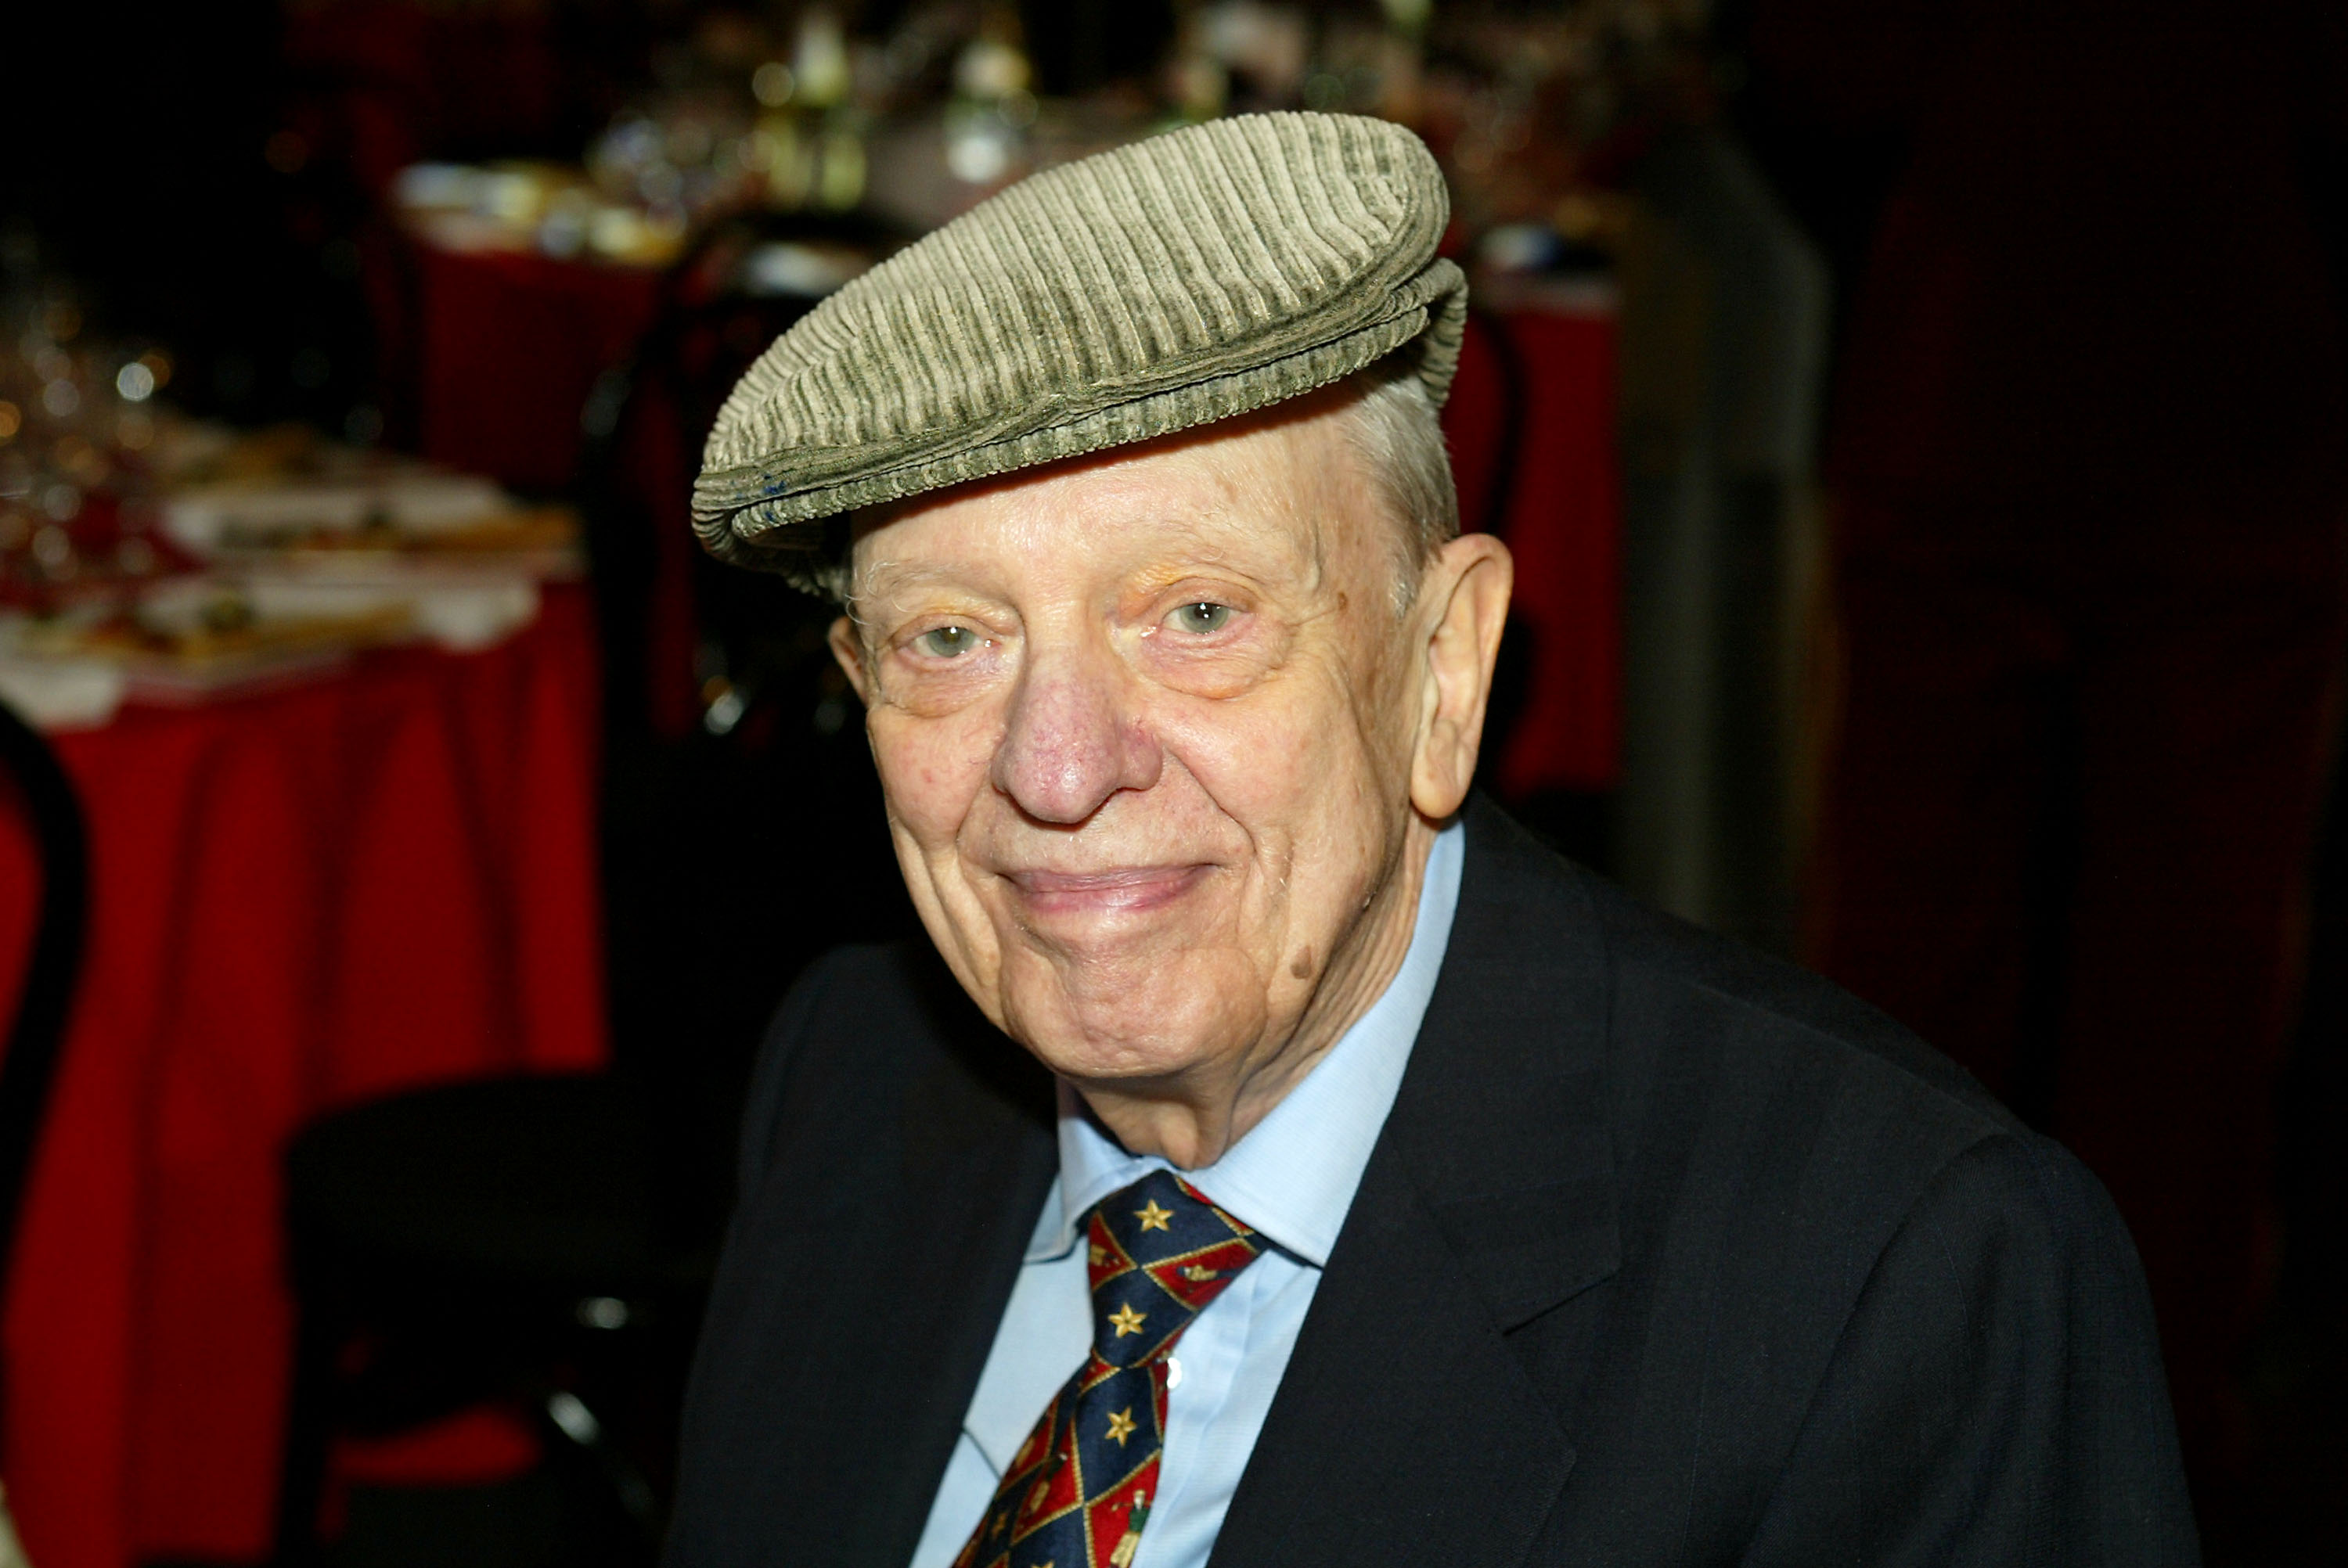 Don Knotts at the TV Land Awards in 2003